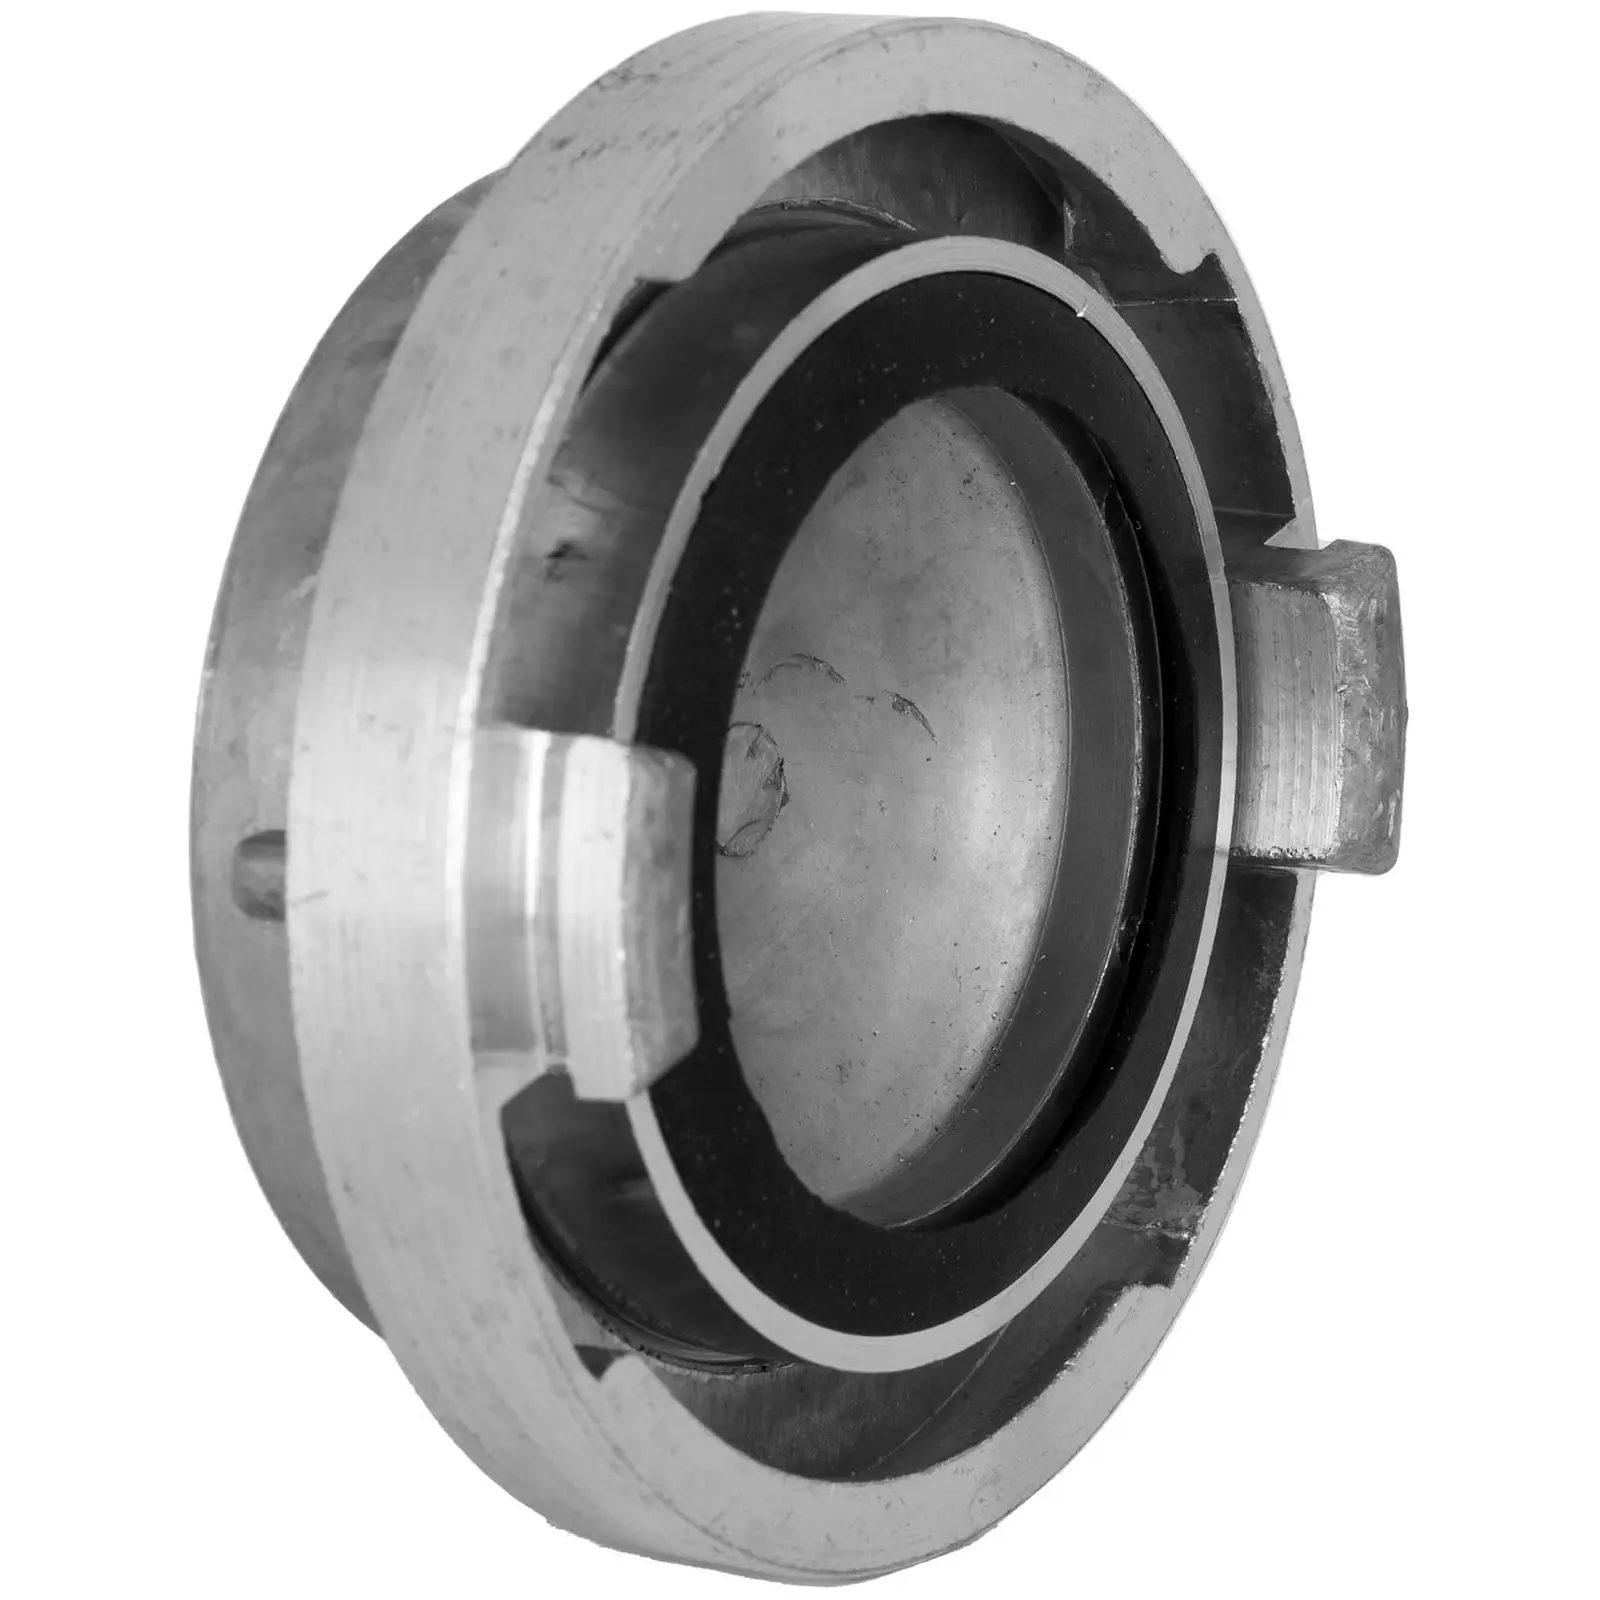 Blind Coupling for 3" (Storz size: B) water hoses